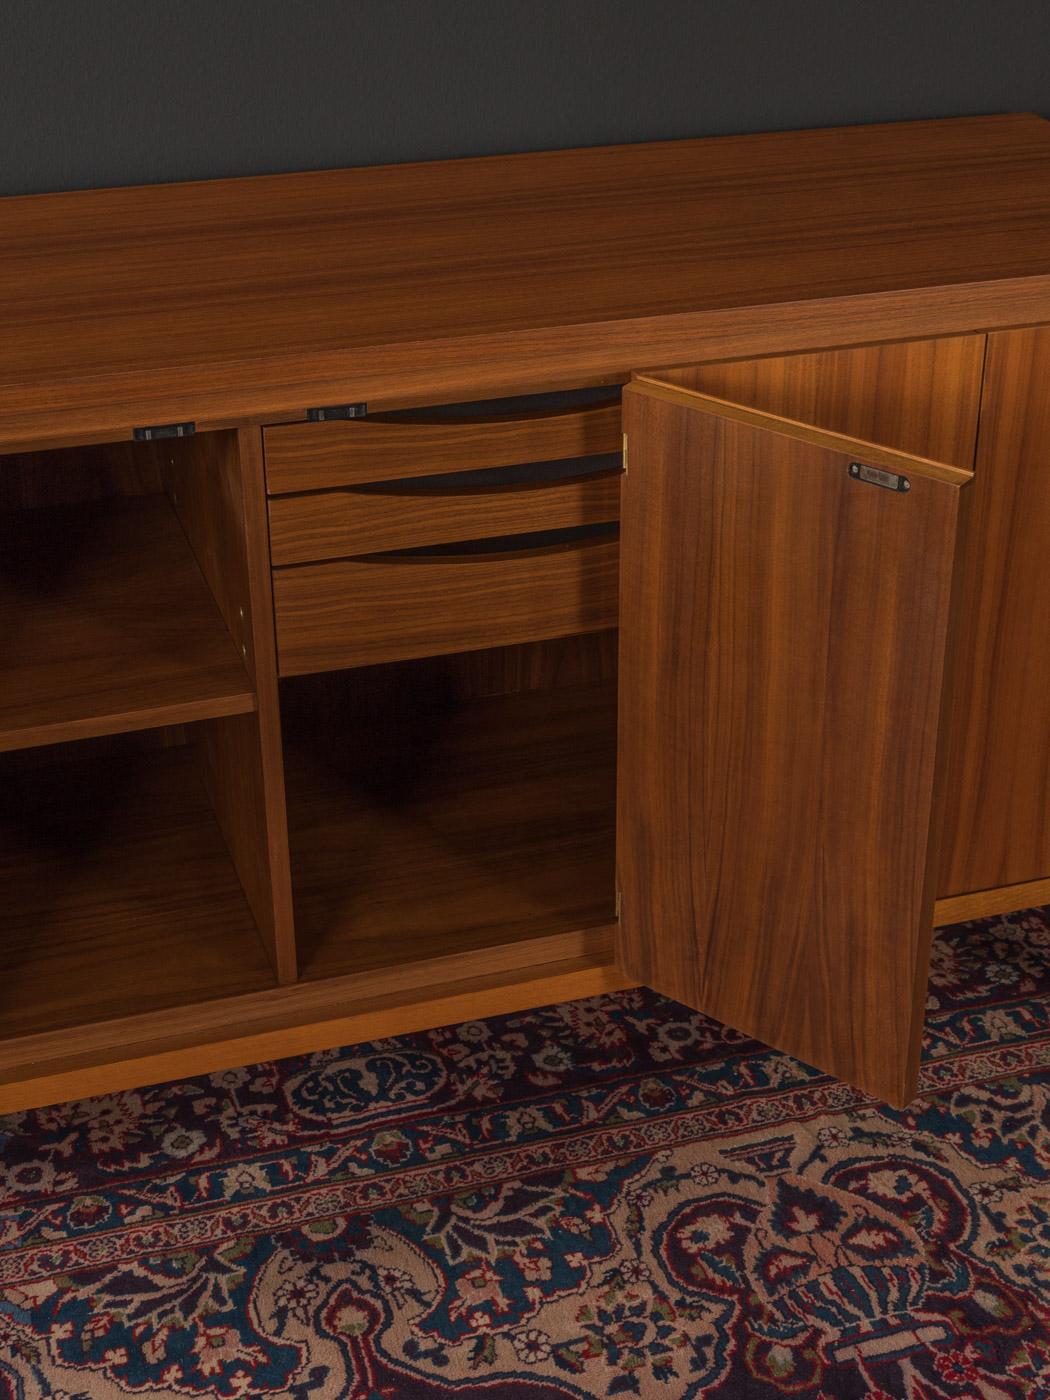 Wk Möbel Sideboard from the 1950s Designed by Paul McCobb, Made in Germany 1